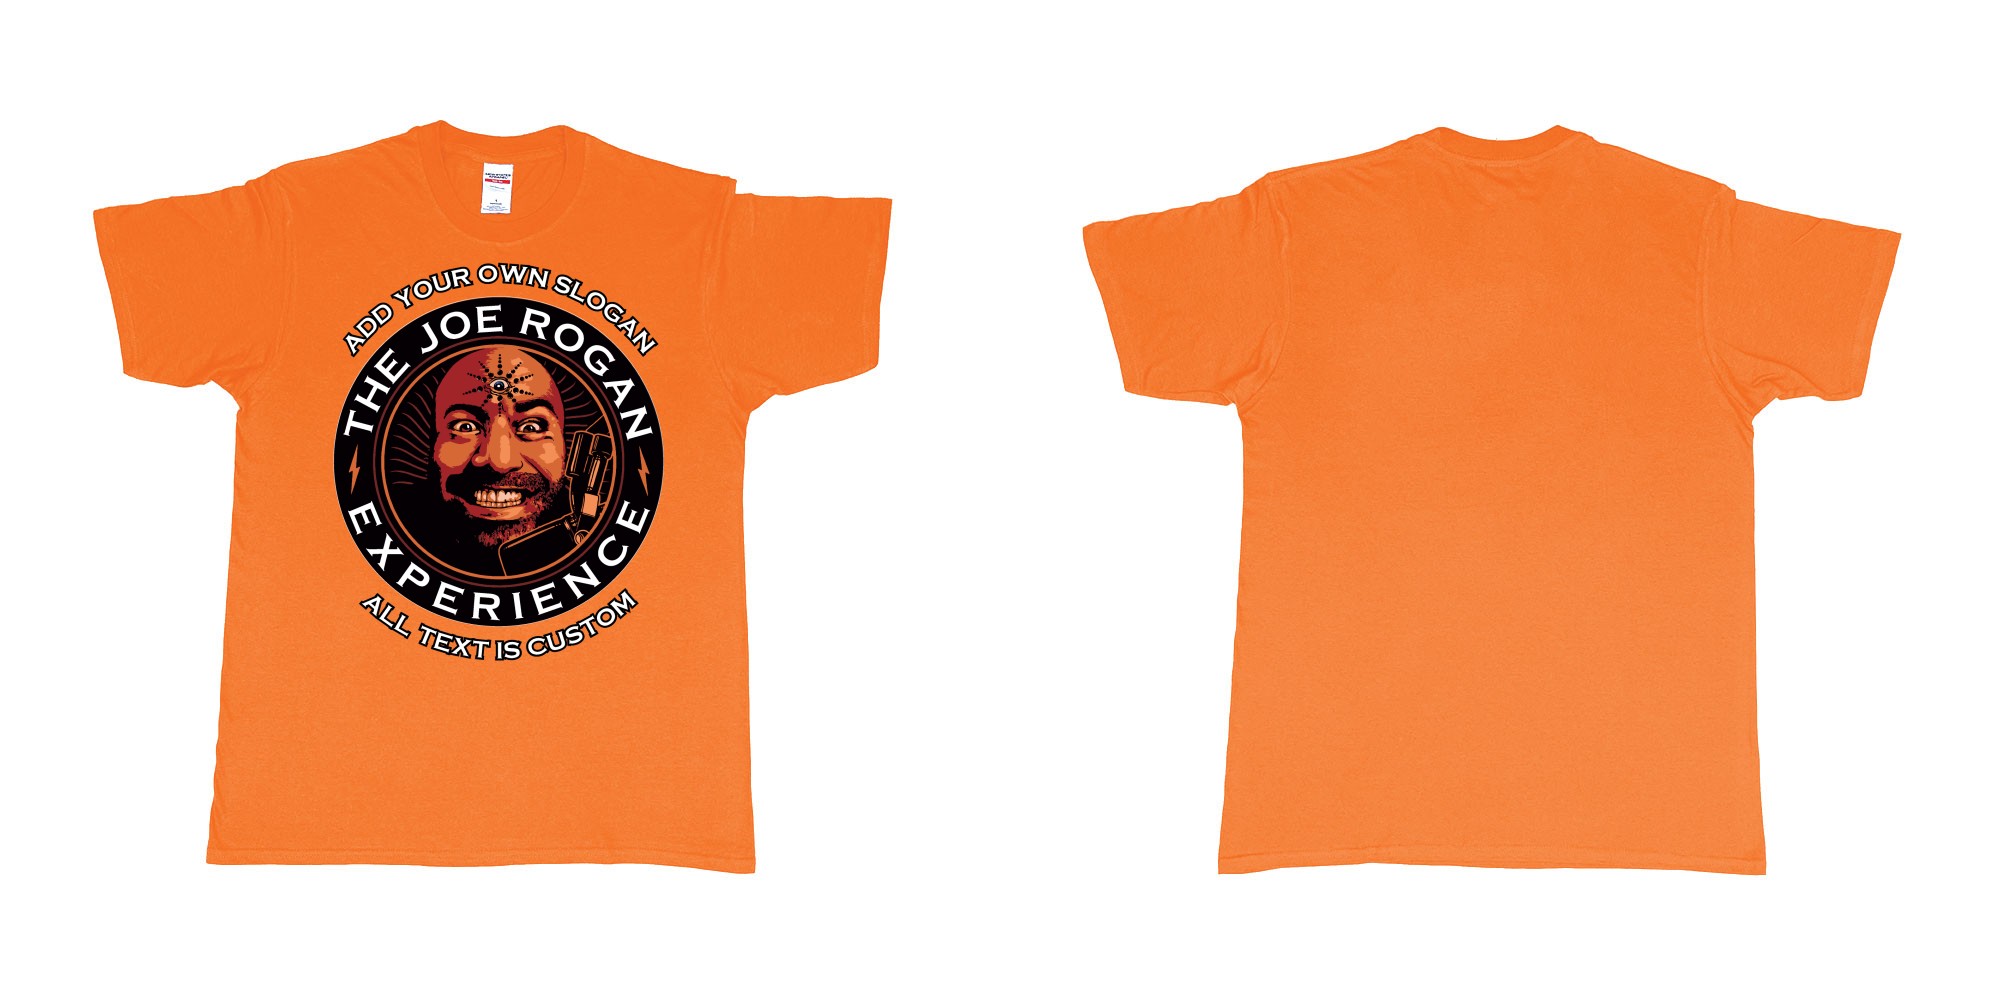 Custom tshirt design the joe rogan experience custom tshirt in fabric color orange choice your own text made in Bali by The Pirate Way